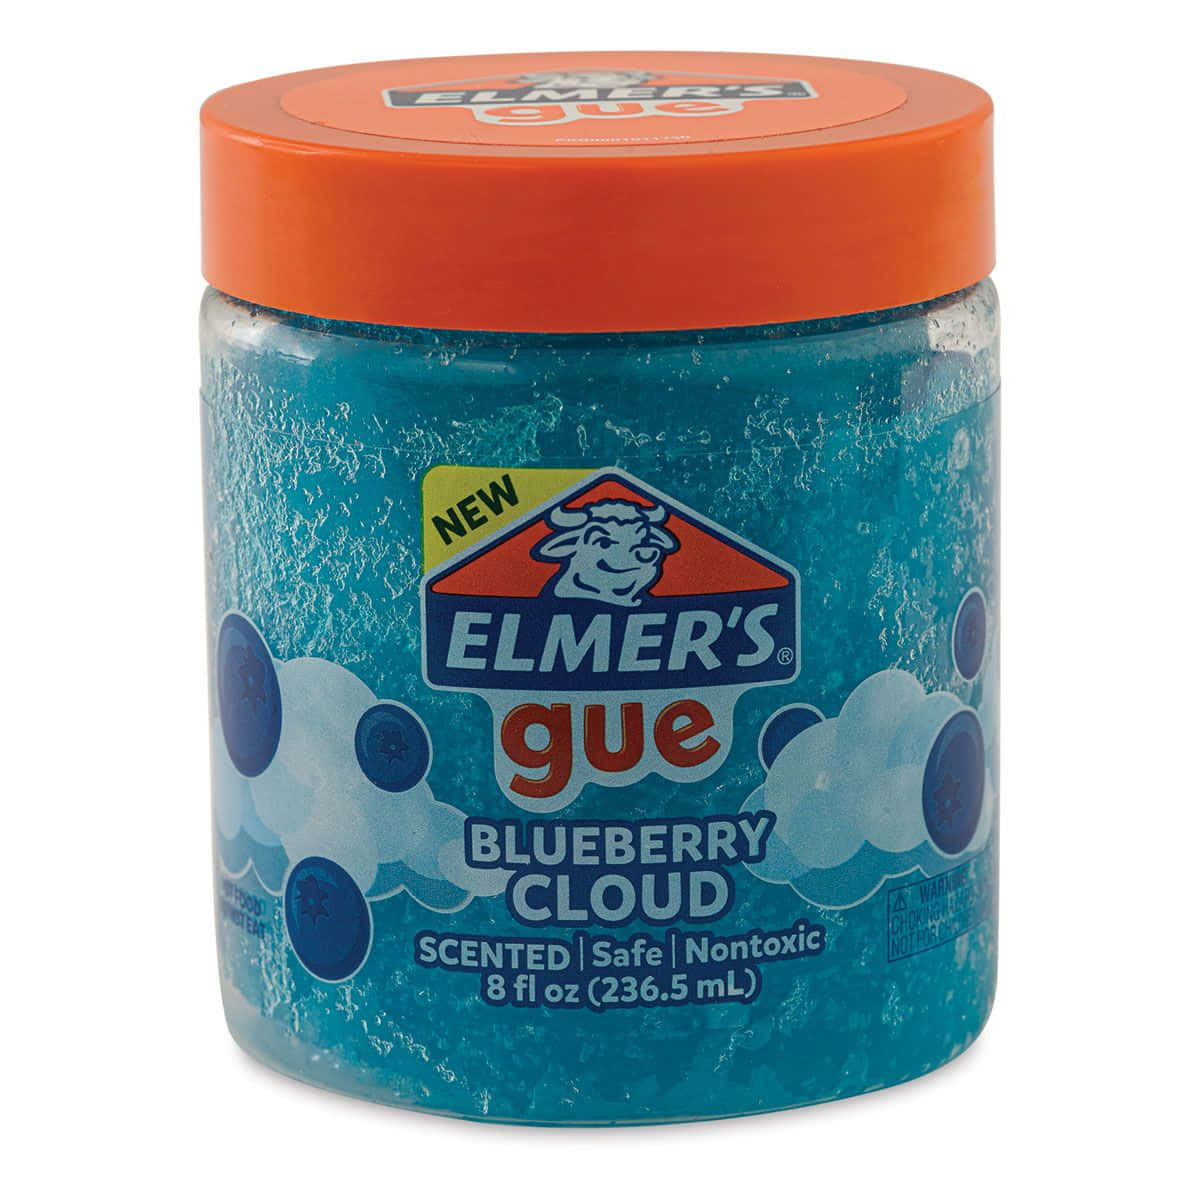 Blueberry Cloud Slime Pictures